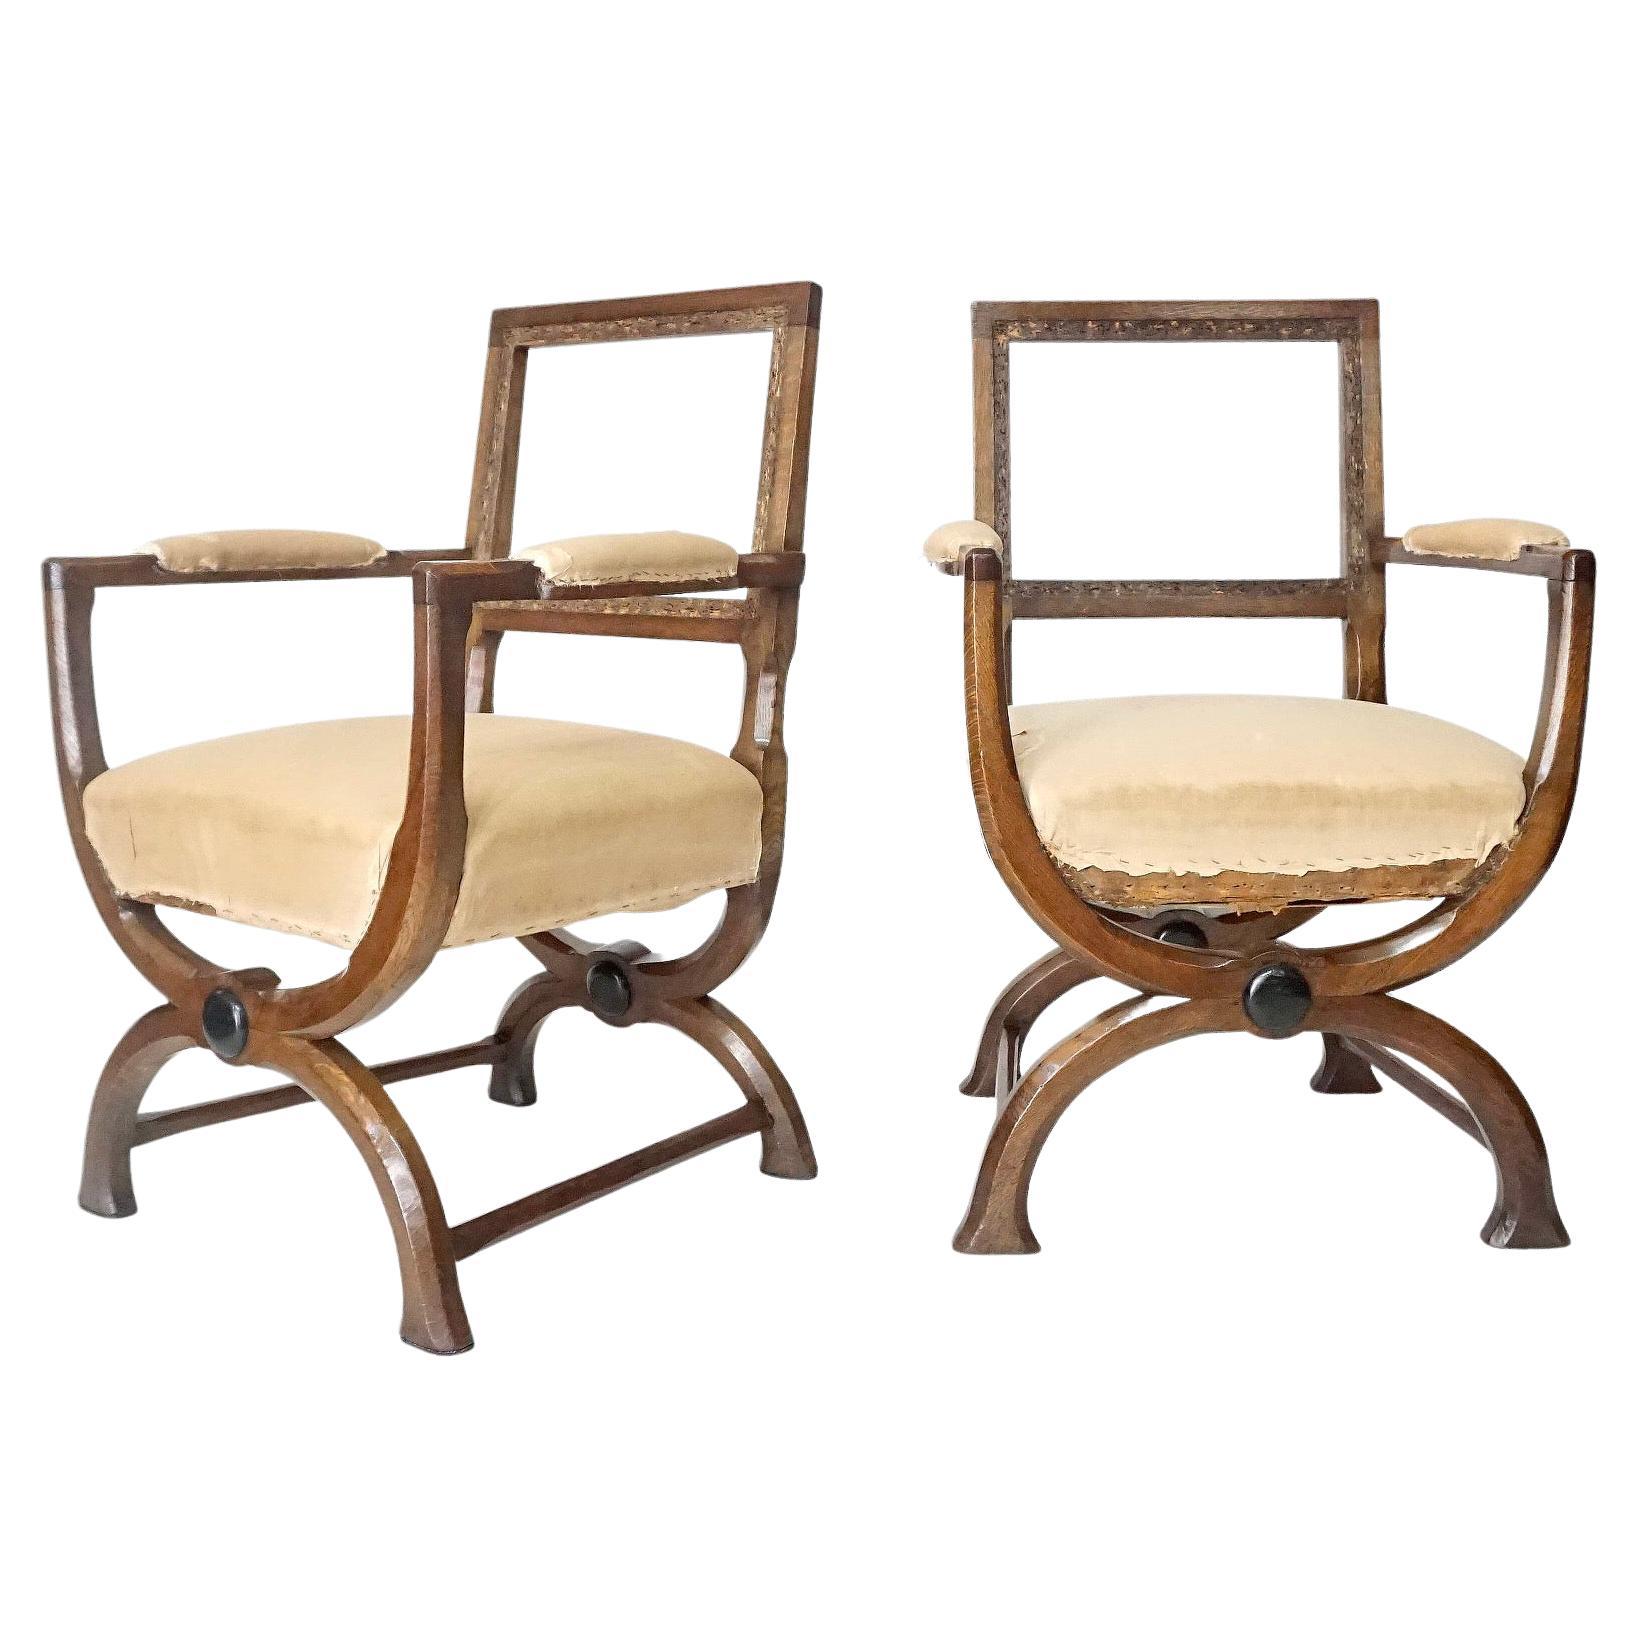 English Oak Gothic Style Curule Armchairs Attributed to A.W.N. Pugin, circa 1830